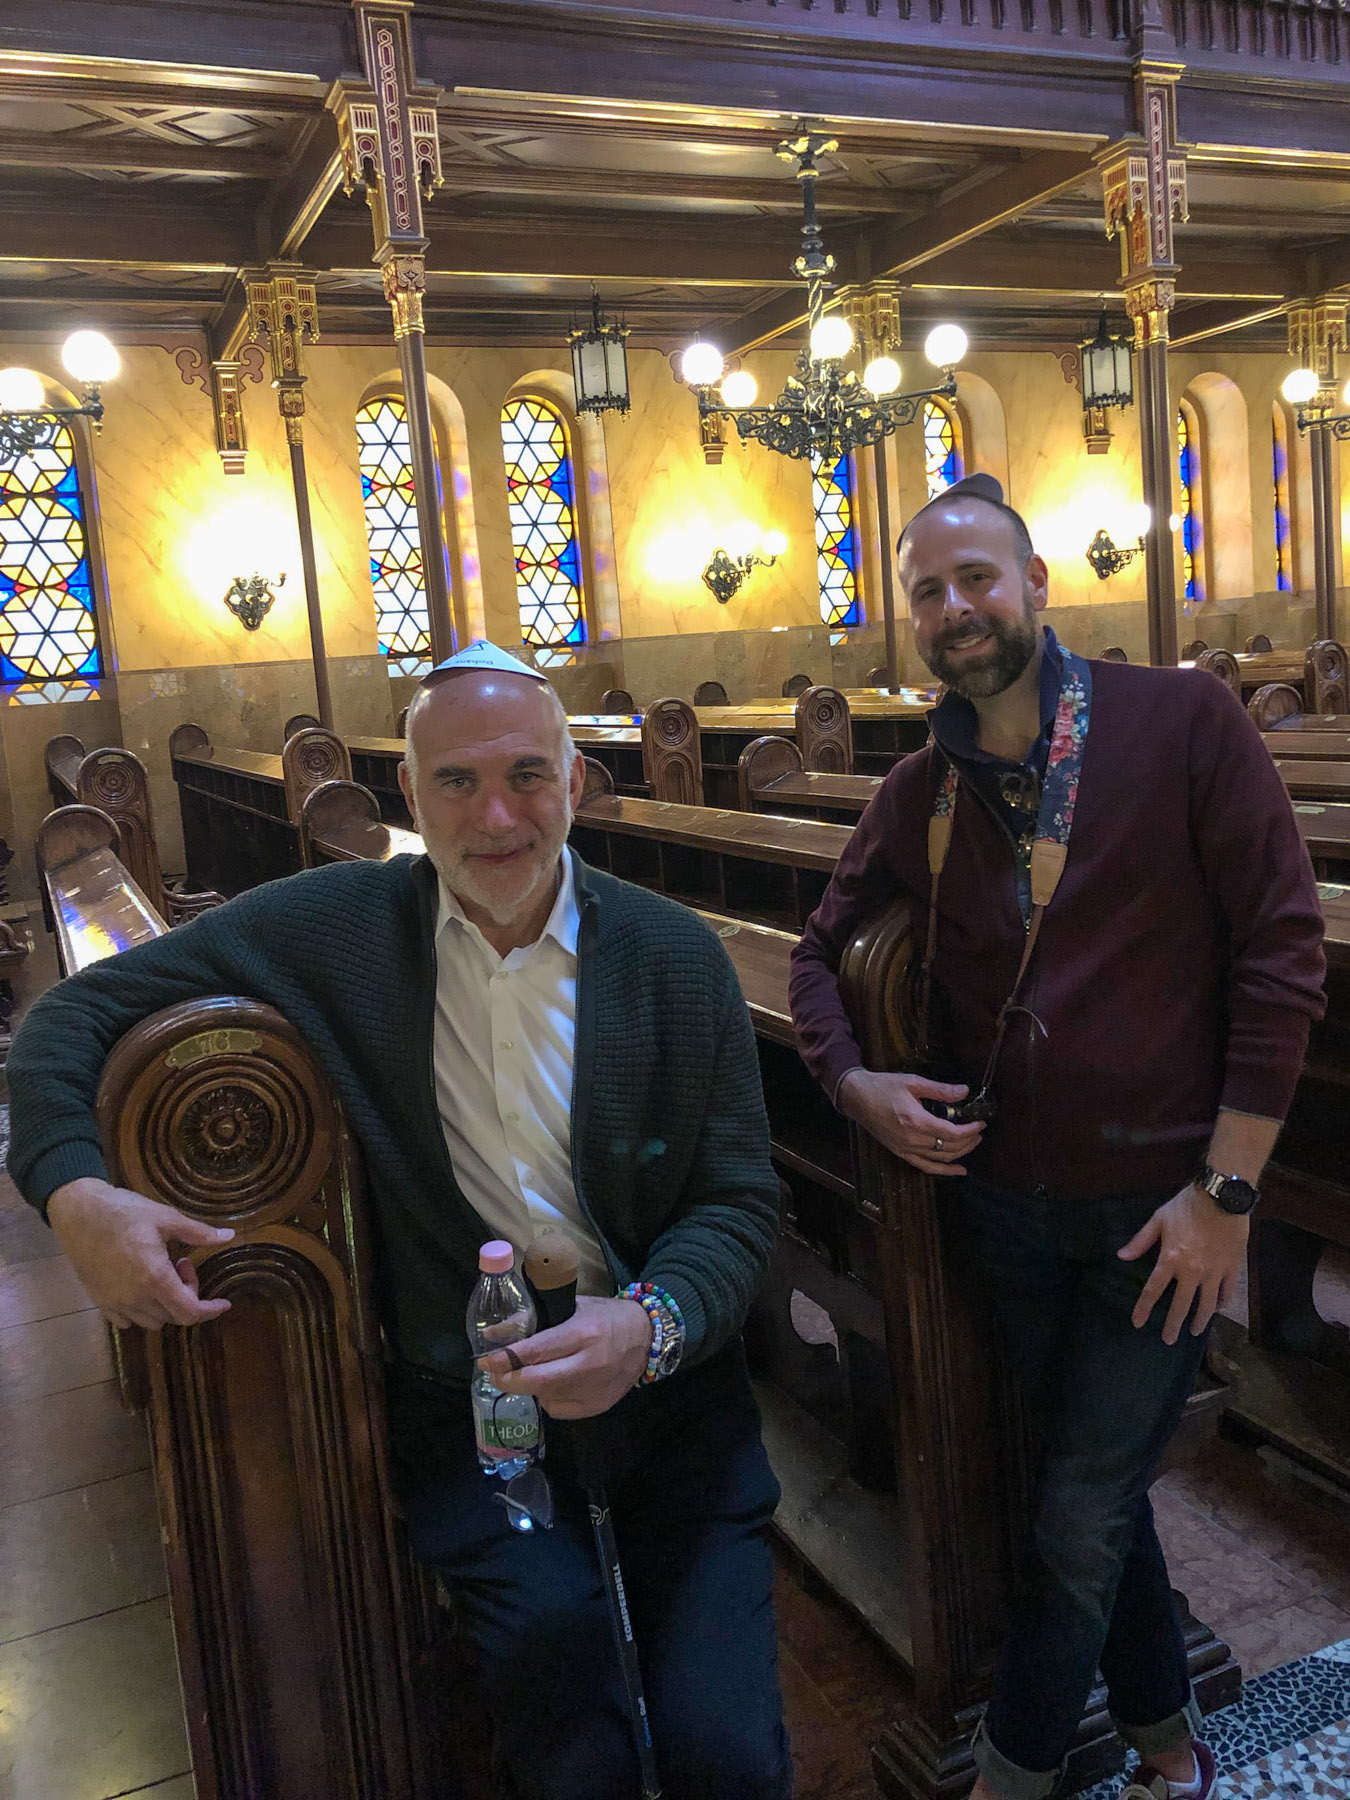 Charles and the Well-Traveled Fella at the Dohány Street Synagogue, Budapest